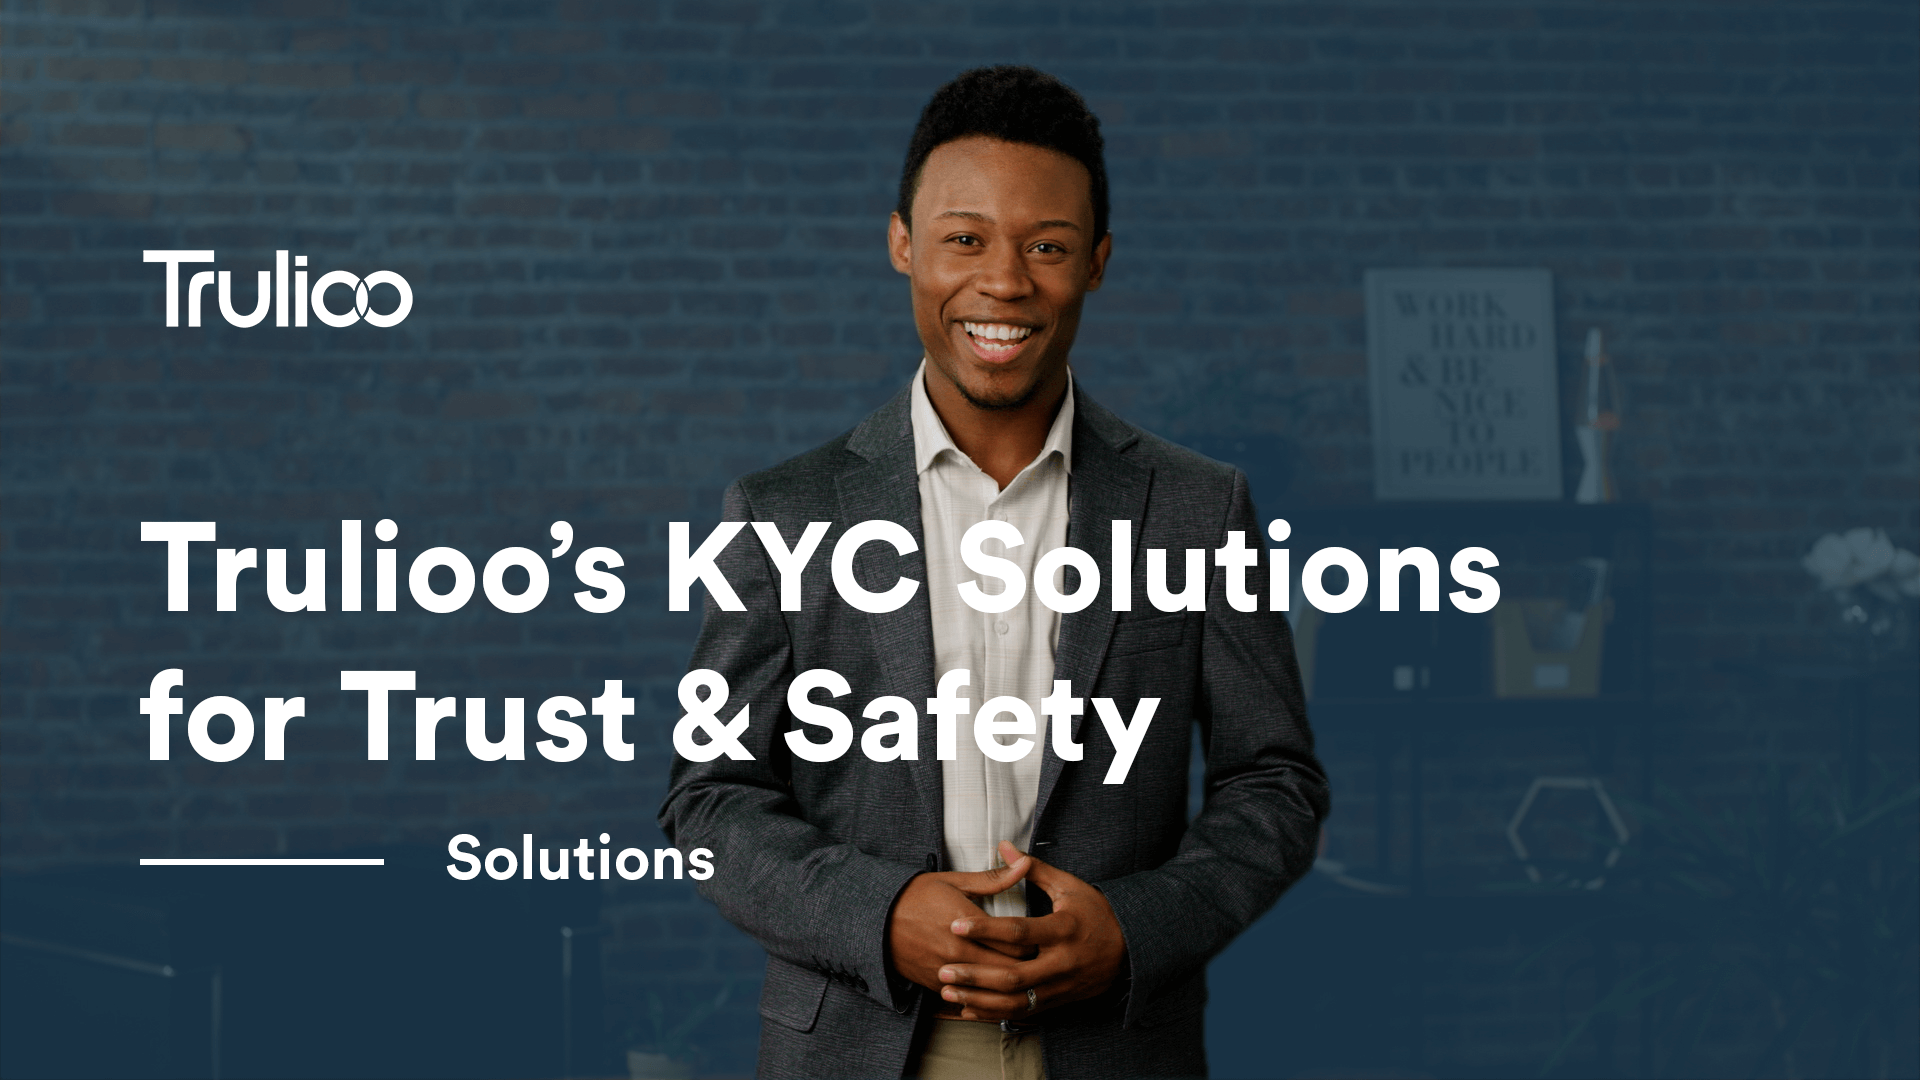 Trulioo’s KYC Solutions for Trust & Safety